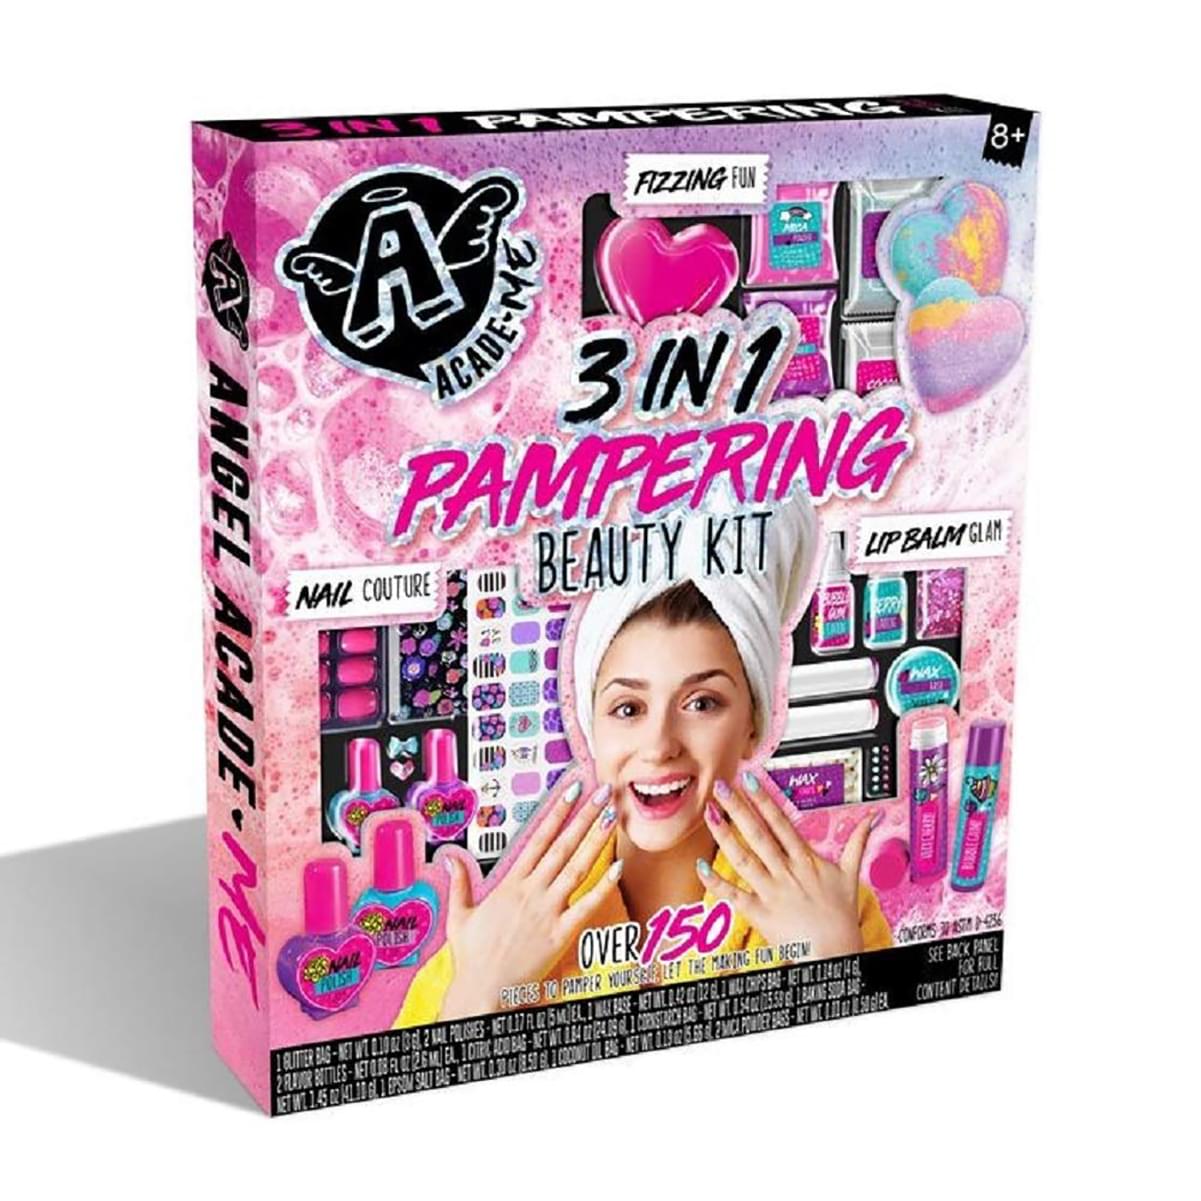 3 in 1 Girls Pampering Beauty Kit | Over 150 Pieces